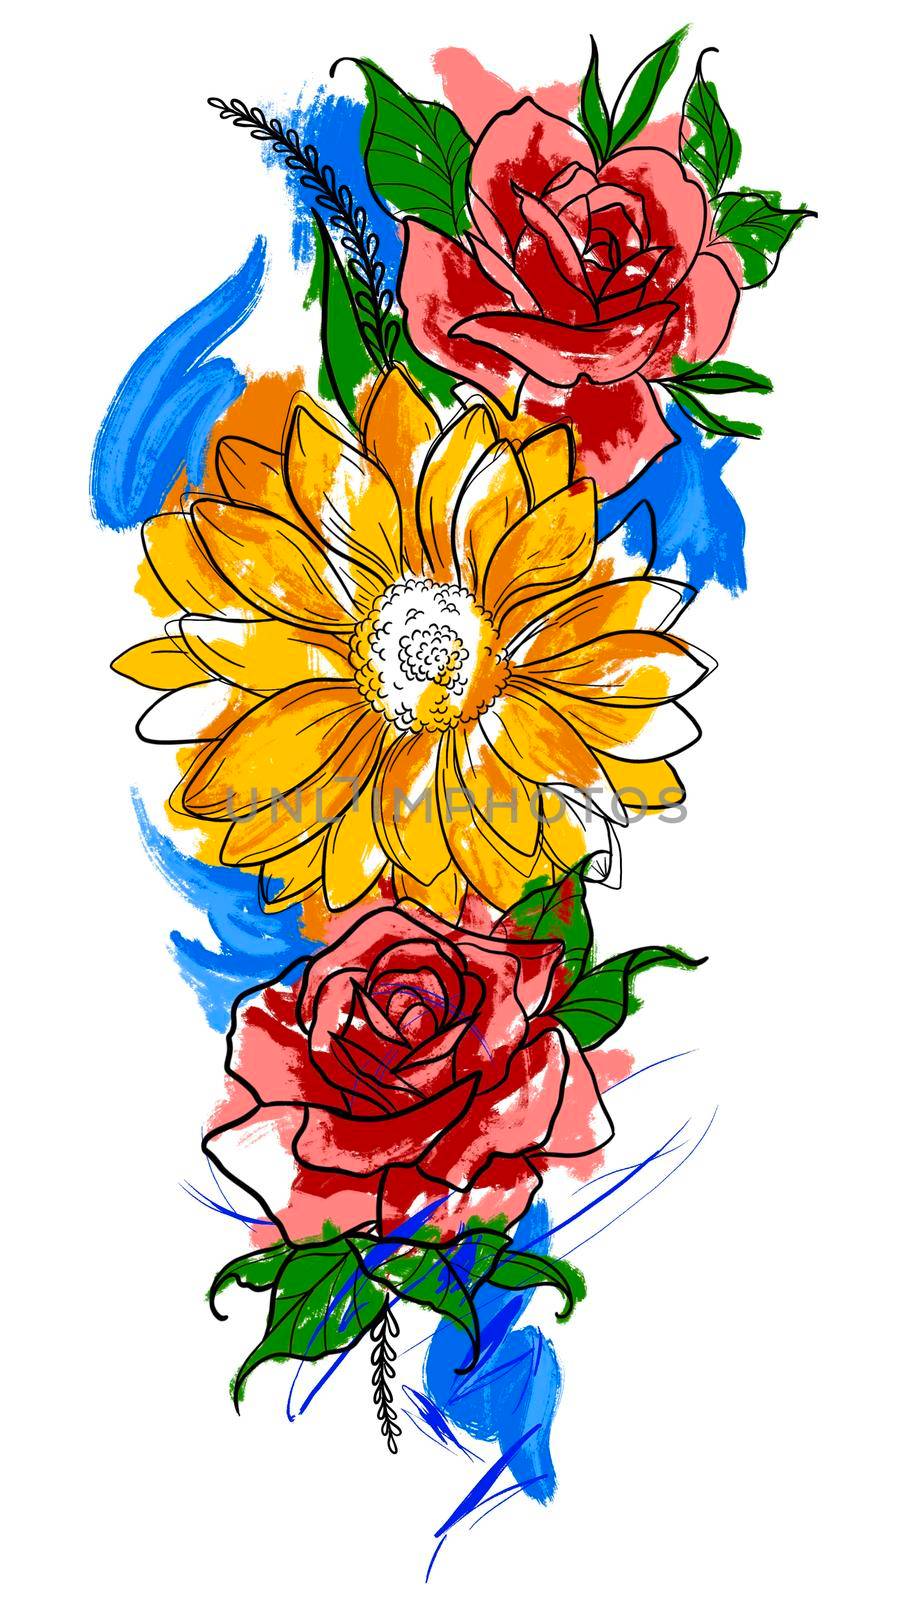 illustration of bright flowers with black outline in a watercolor style by kr0k0